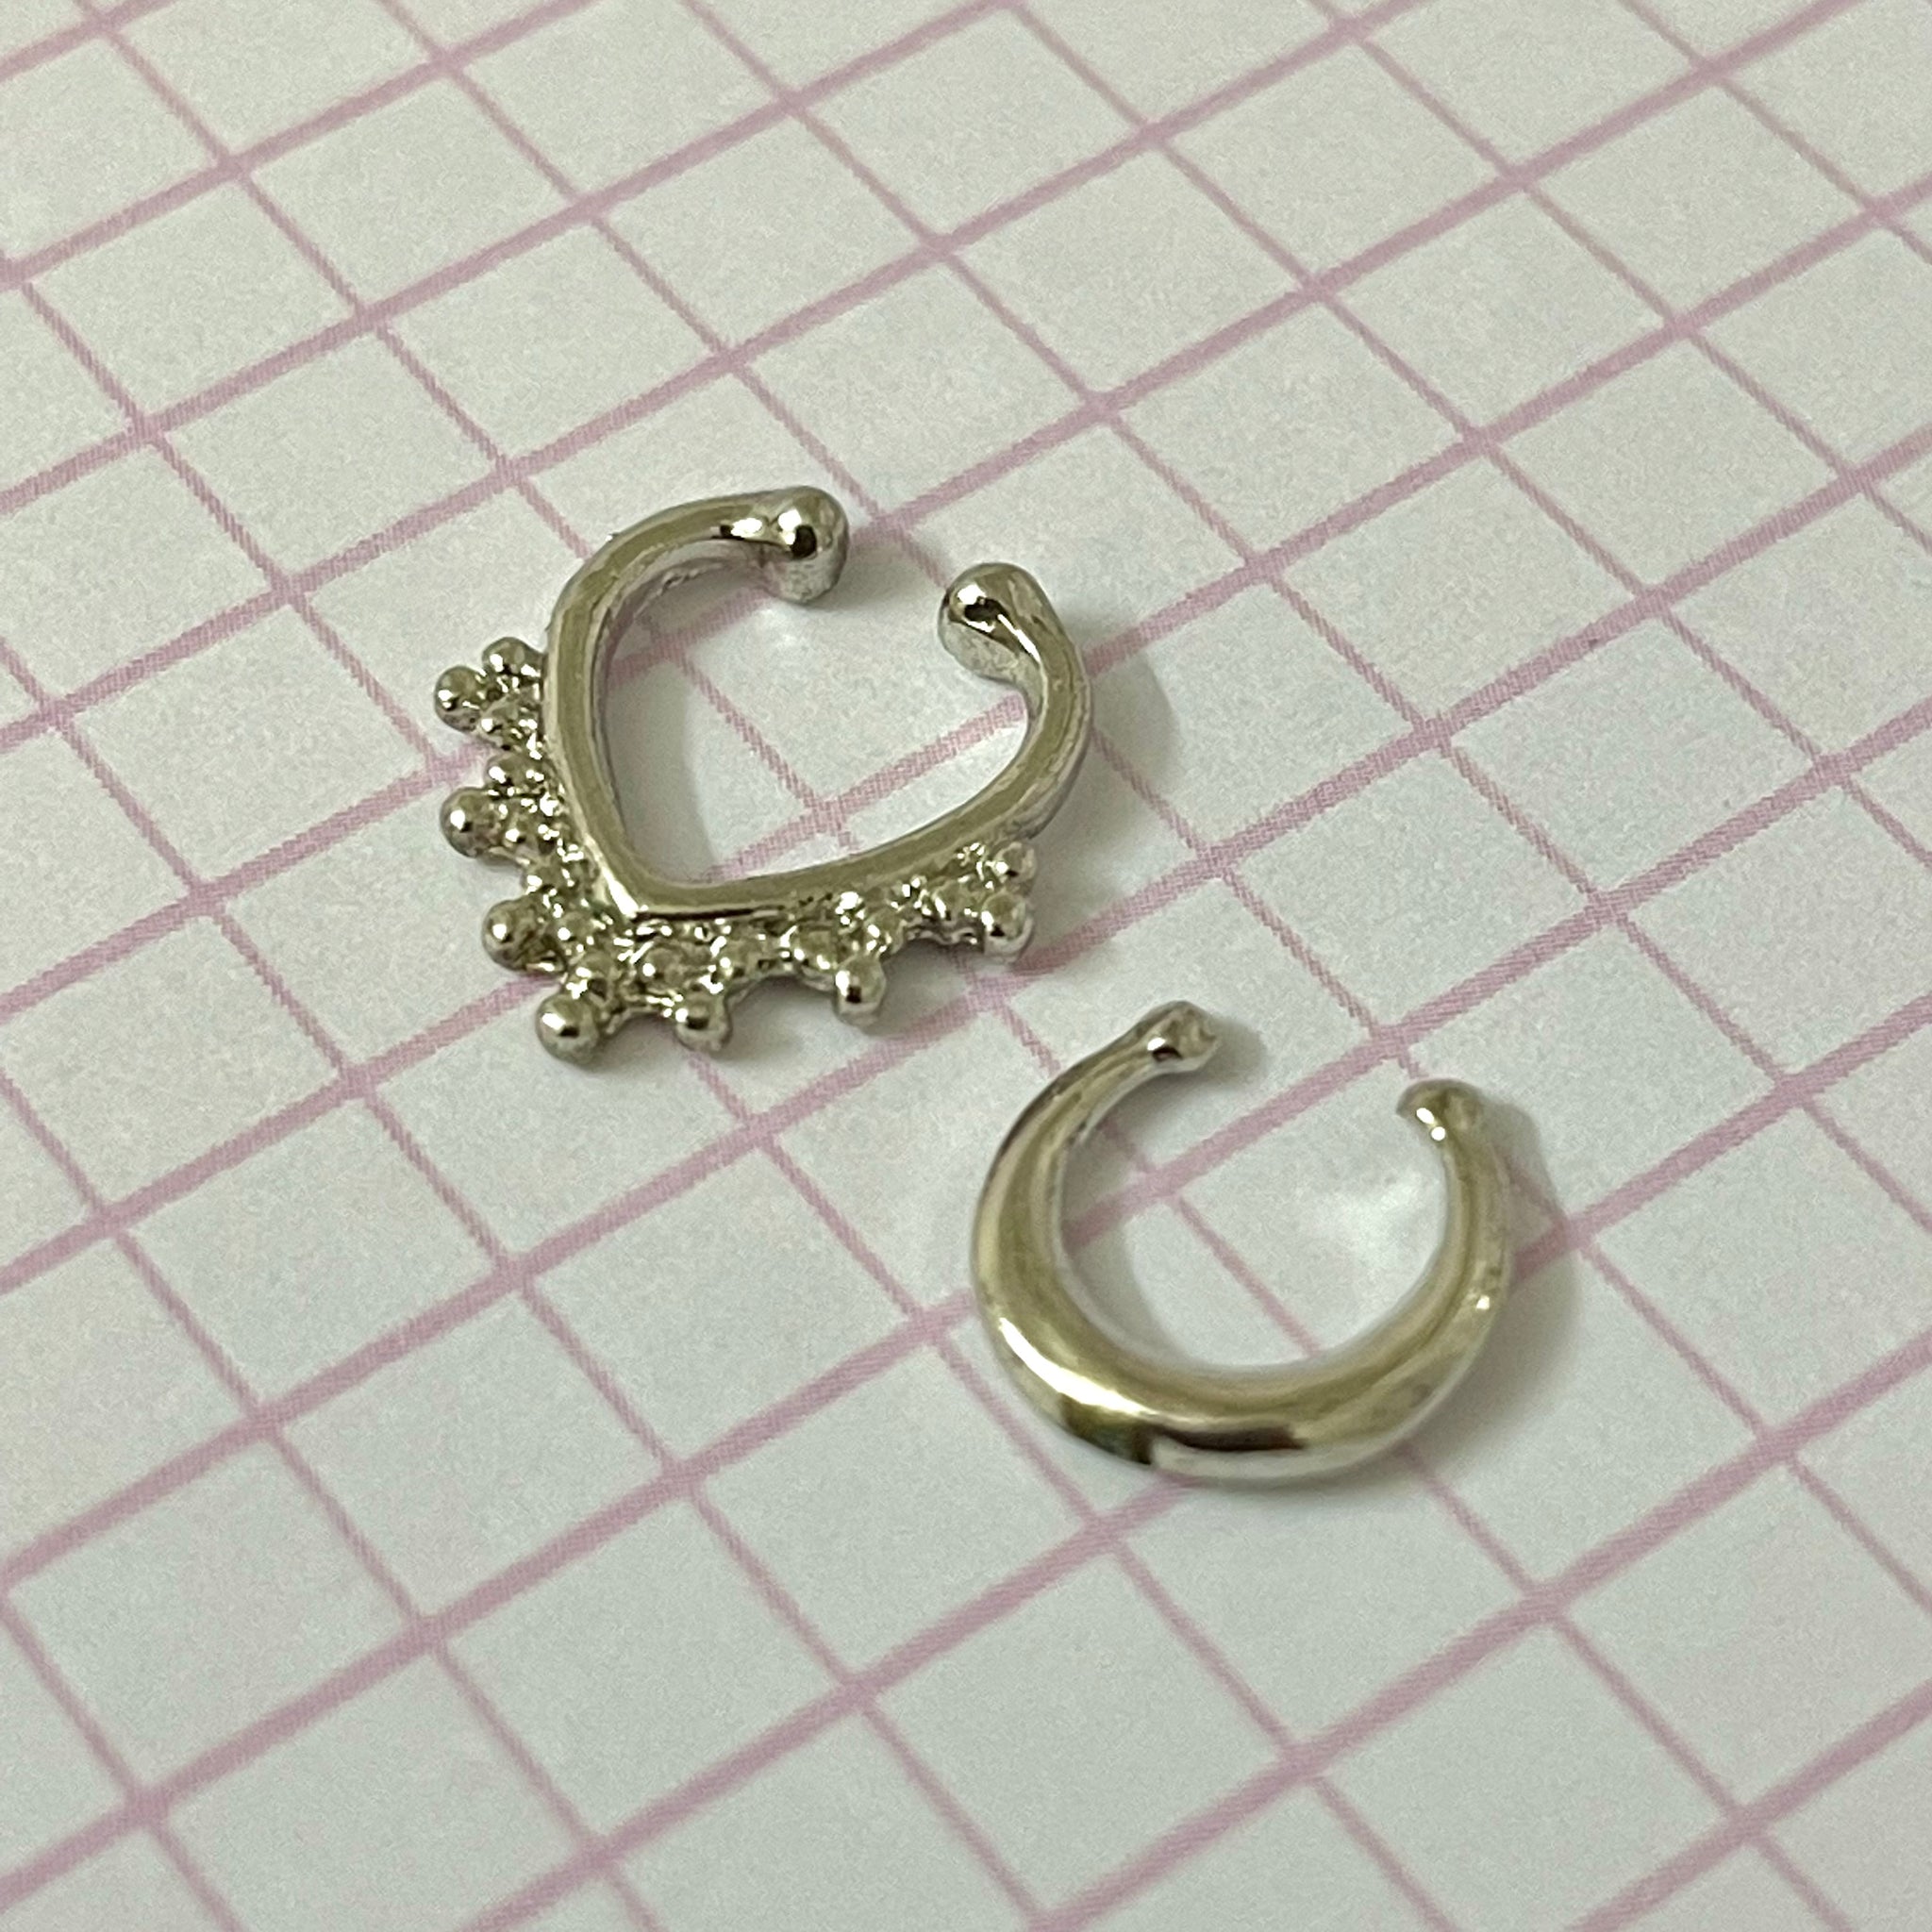 SET OF TWO SEPTUM PIERCING PRESS SILVER-TONED NOSE RING